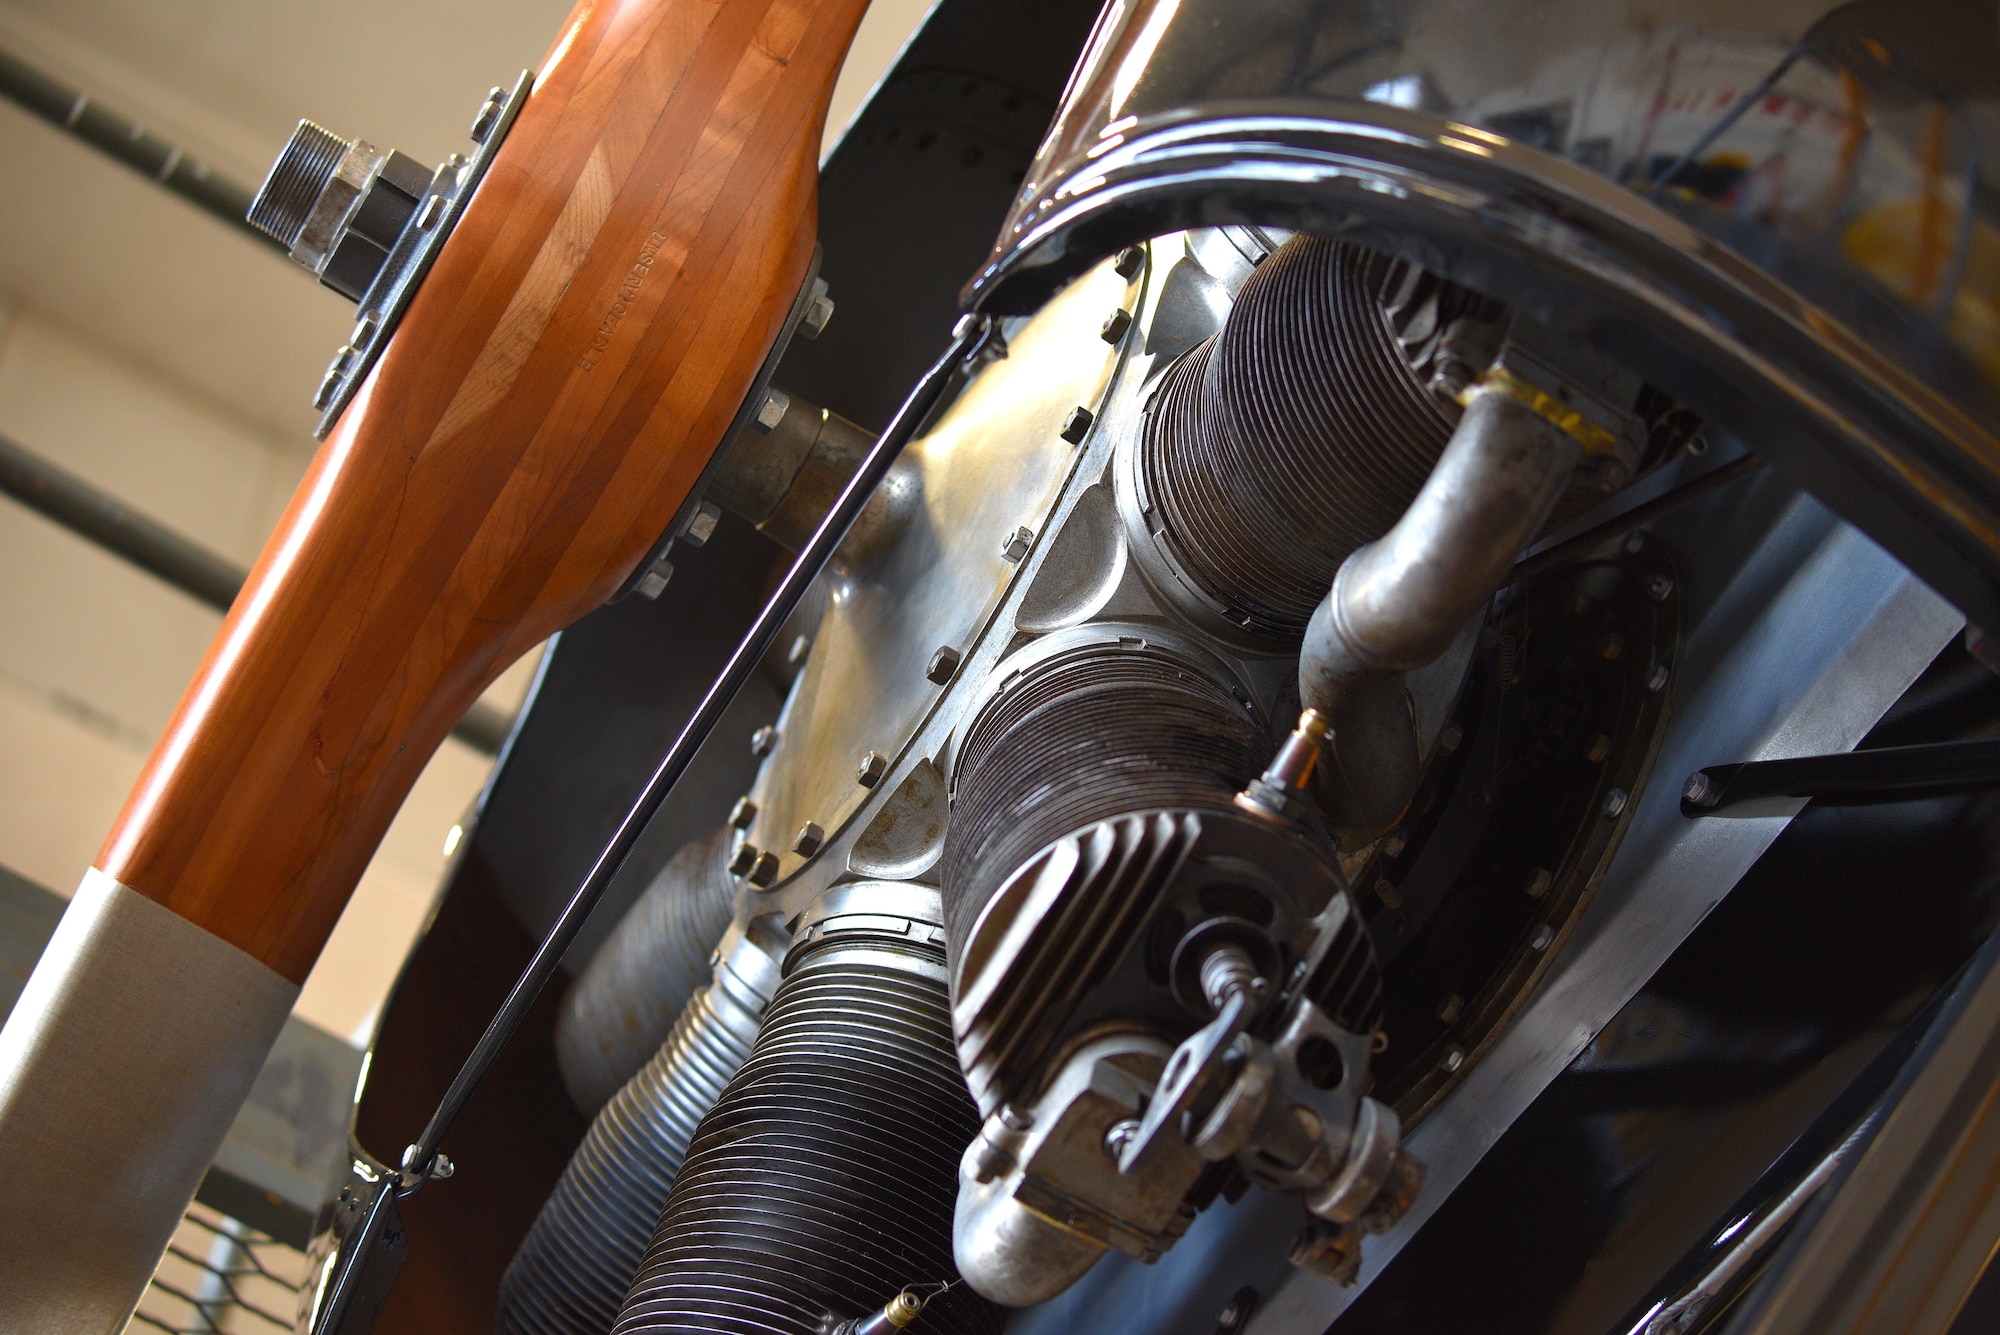 View of biplane engine and propeller during restoration.